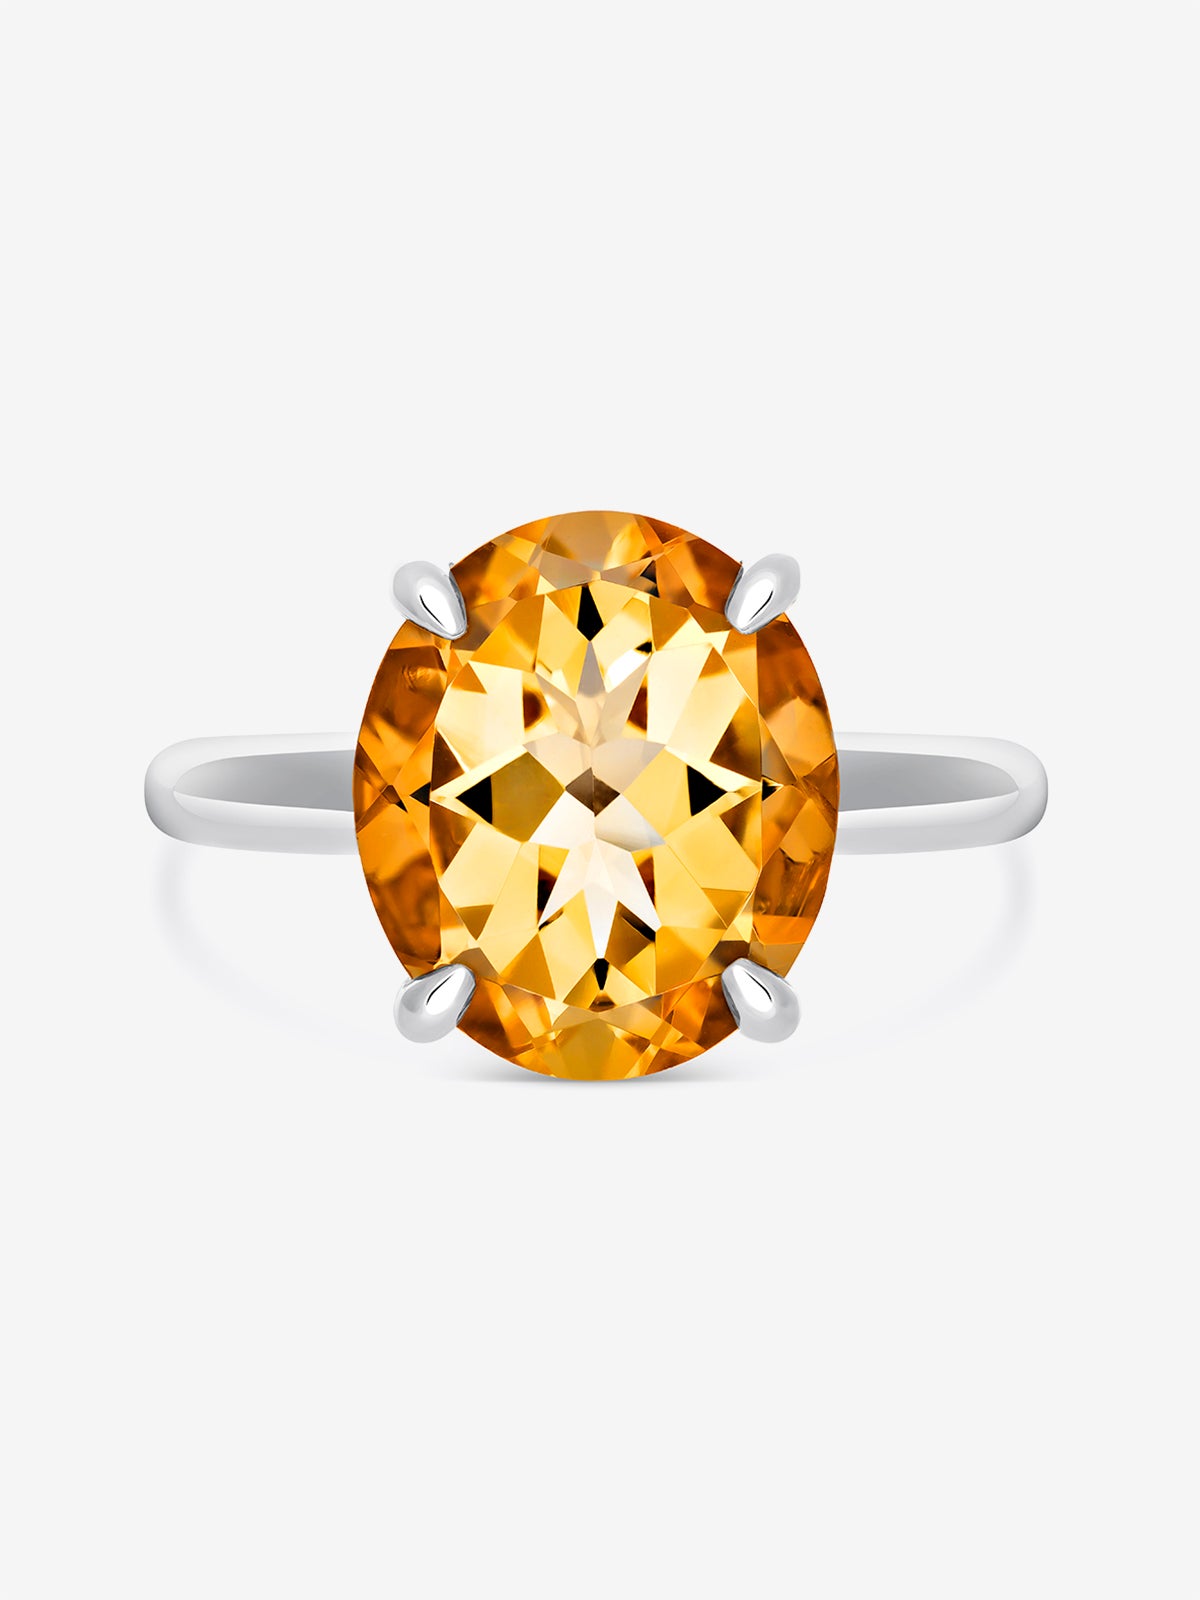 925 silver cocktail ring with oval-cut citrine quartz of 3.89 cts